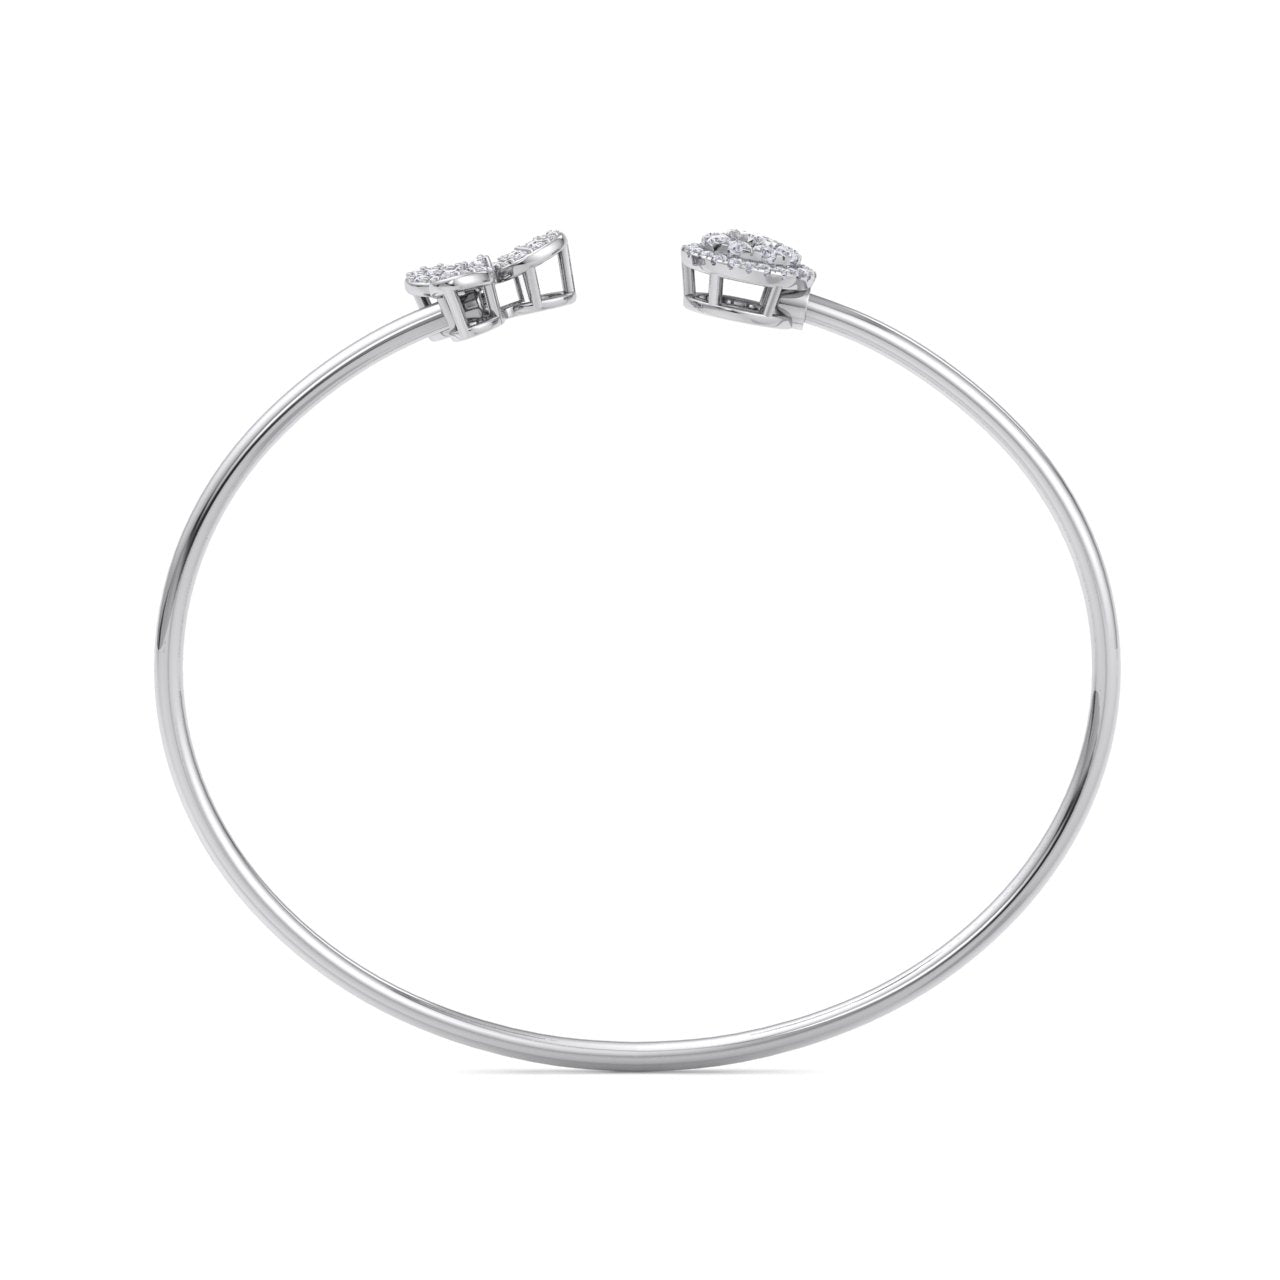 Bracelet in white gold with white diamonds of 0.47 ct in weight